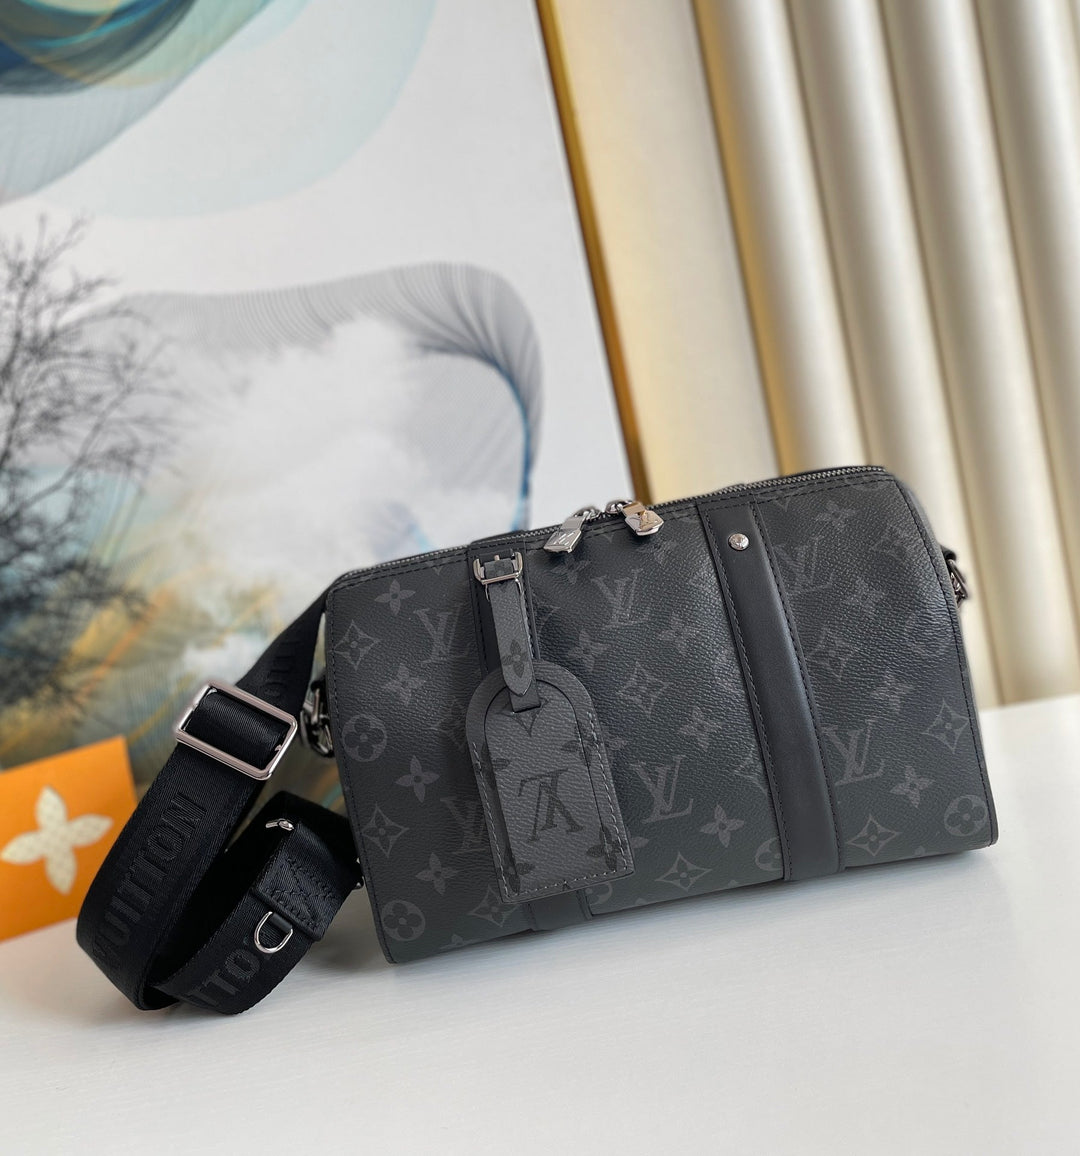 LV City Keepall Monogram Eclipse/Monogram Eclipse Reverse For Men, Bags, Shoulder And Crossbody Bags 10.6in/27cm LV M45936